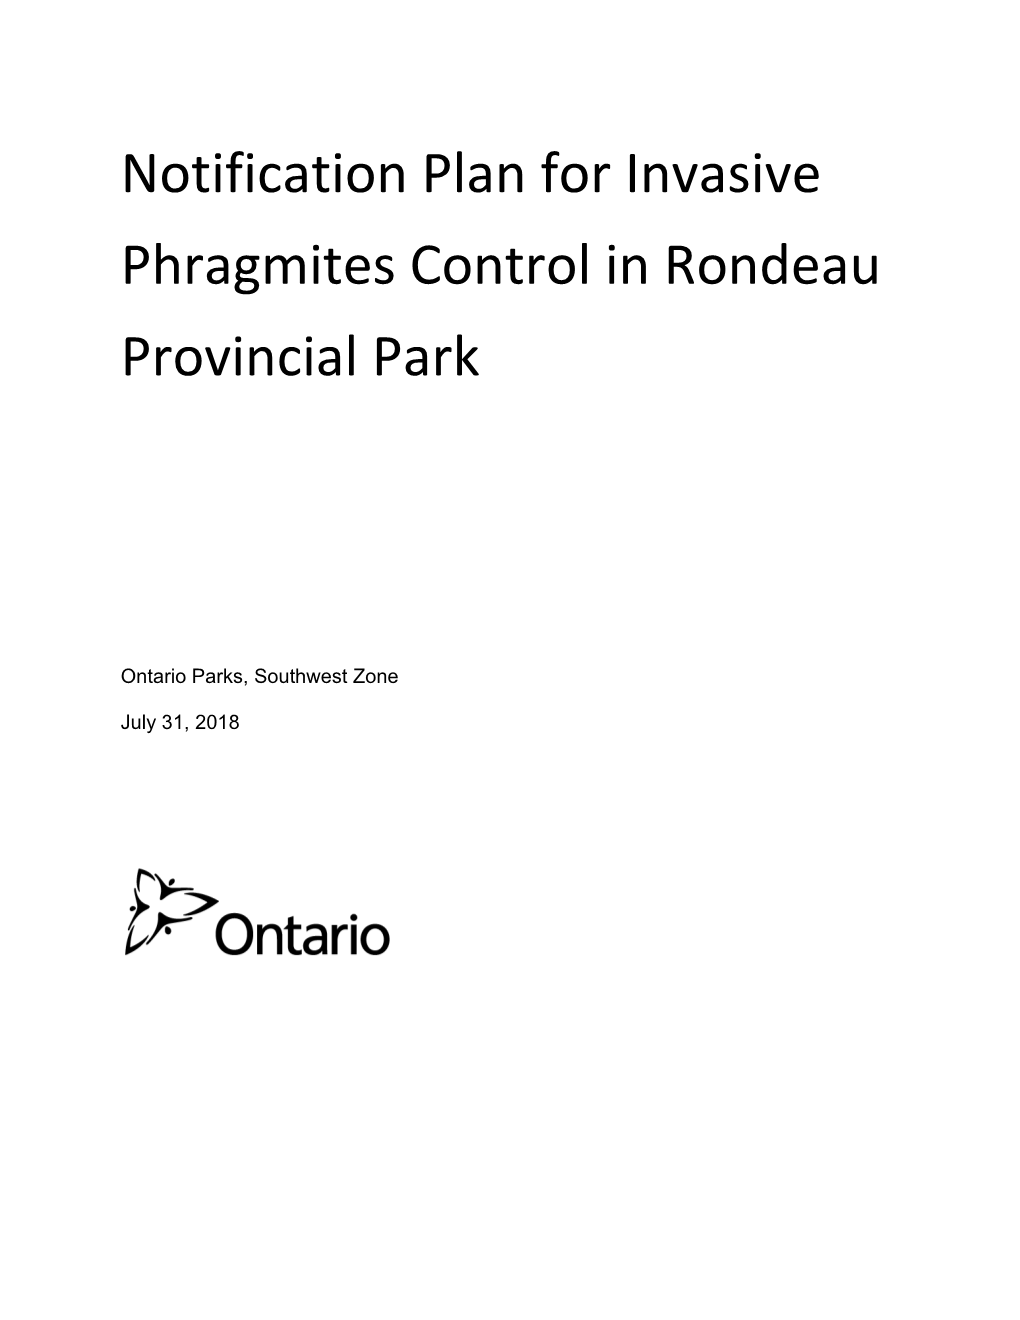 Notification Plan for Invasive Phragmites Control in Rondeau Provincial Park